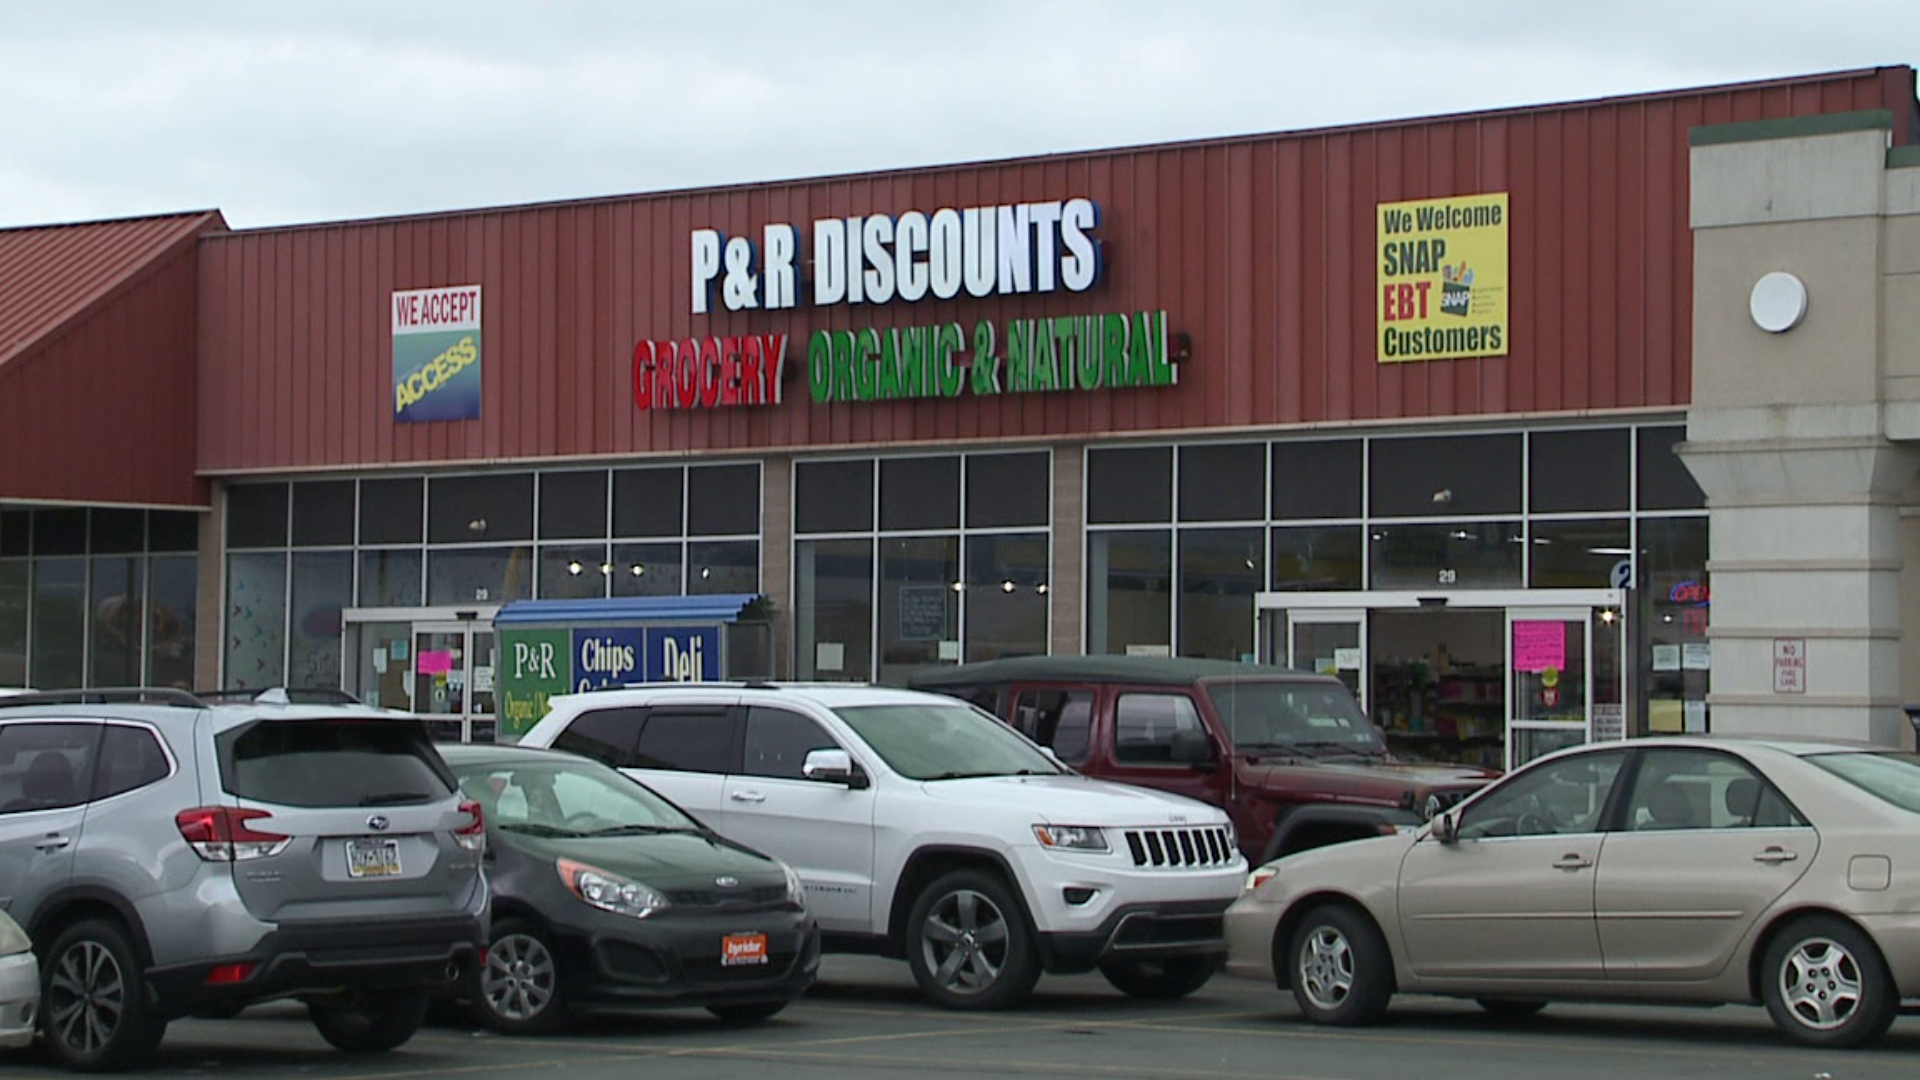 P&R discounts in Edwardsville are closing their doors, hopefully only temporarily.